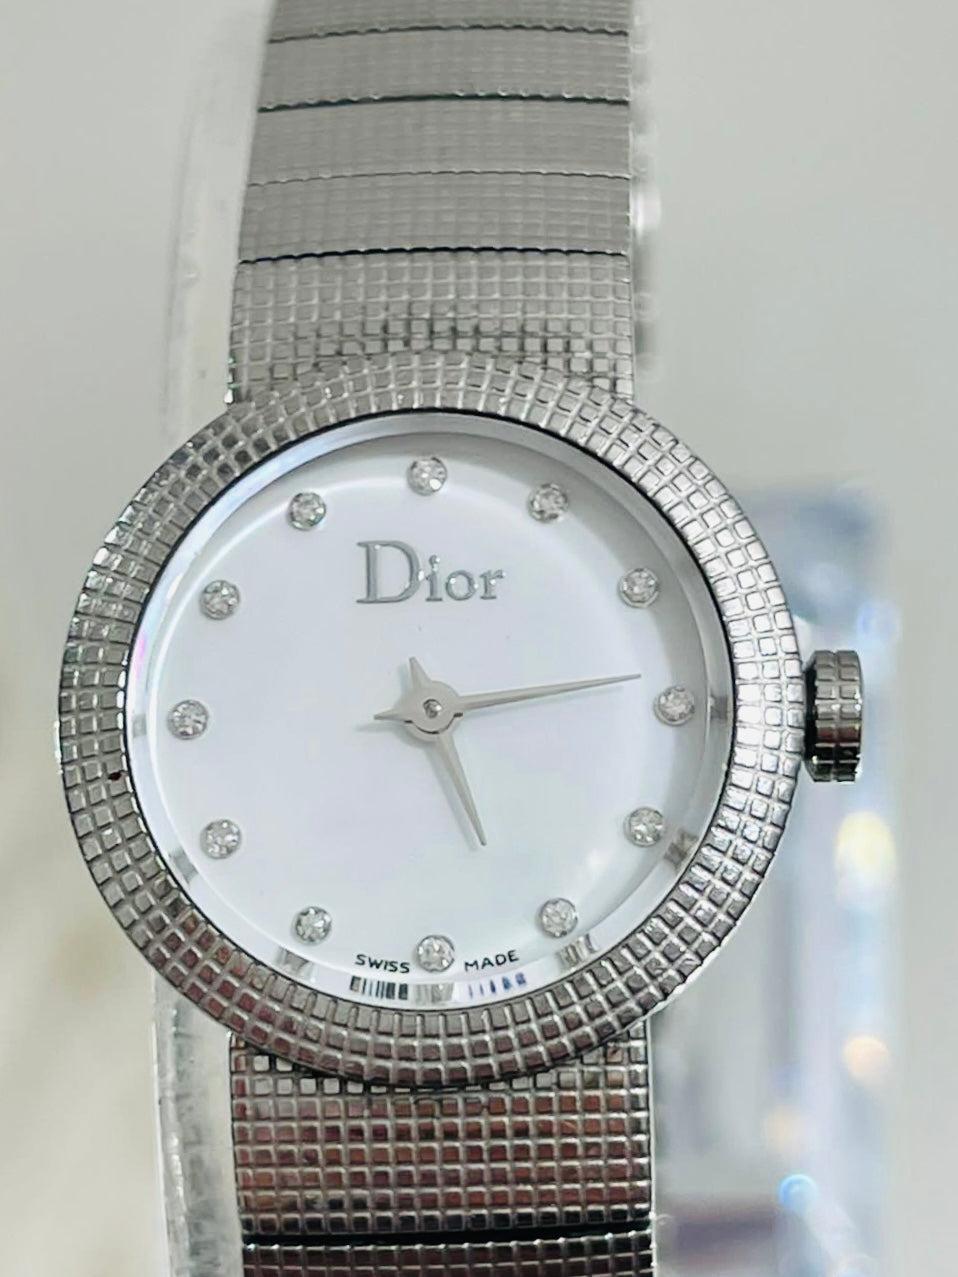 Christian Dior Diamond Dot Dial Baby D Watch

Mother of pearl dial with diamond dot hour markers.

Stainless steel case and strap with deployment buckle closure.

Size - 23mm

Condition - Good/Very Good

Composition - Mother Of Pearl, Diamond,